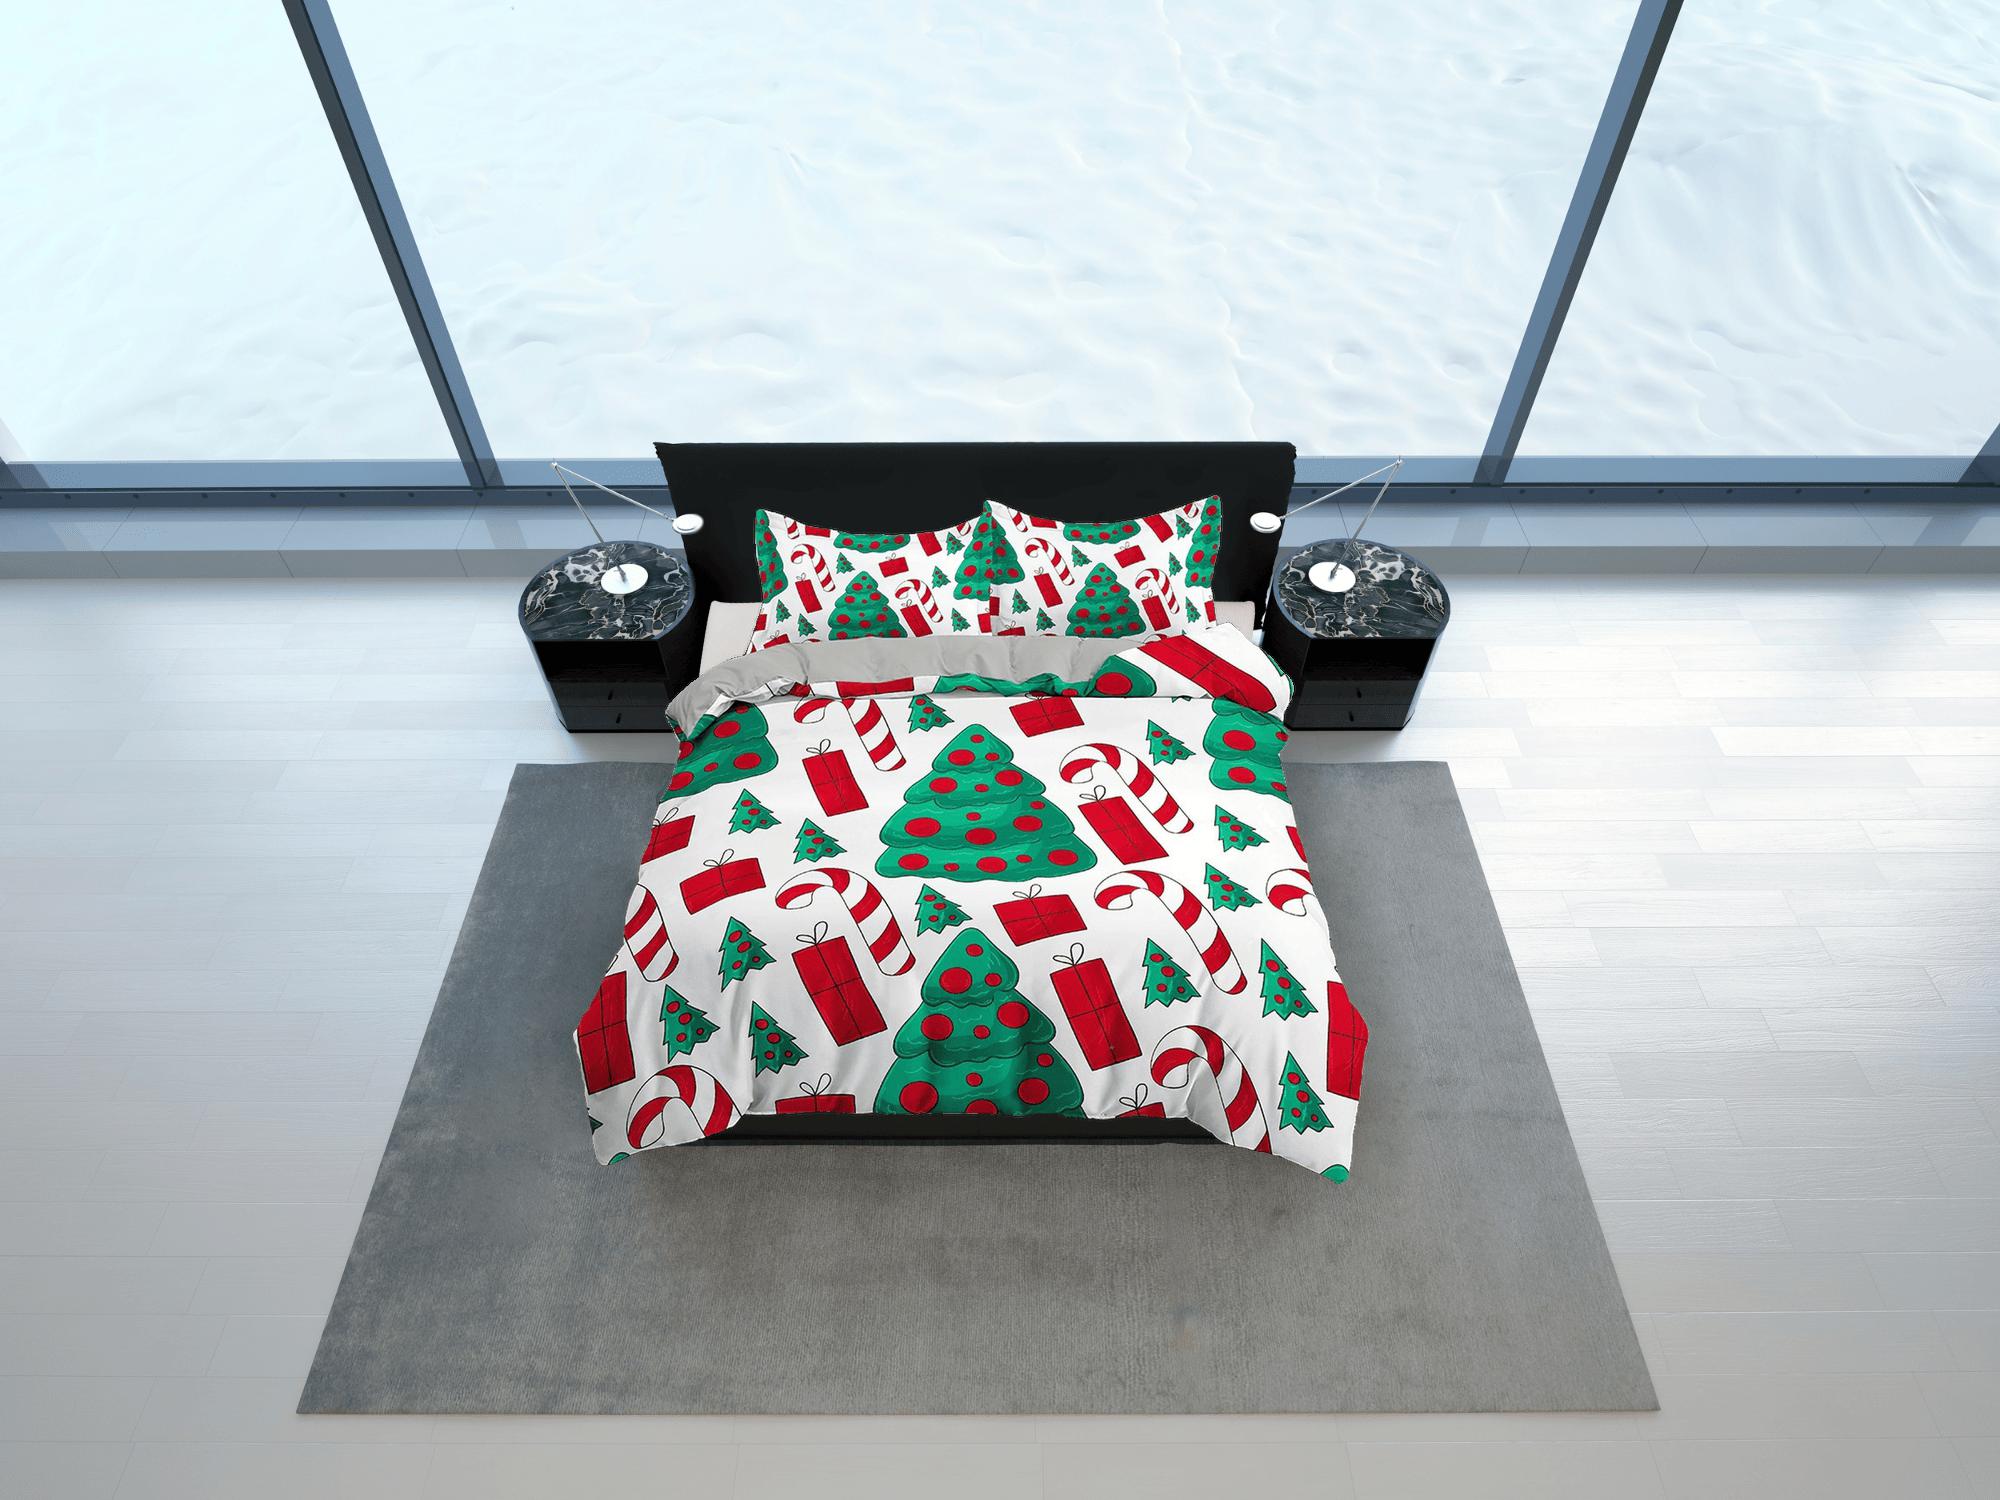 daintyduvet Christmas tree and candy cane duvet cover set, christmas full size bedding & pillowcase, college bedding, crib toddler bedding, holiday gift